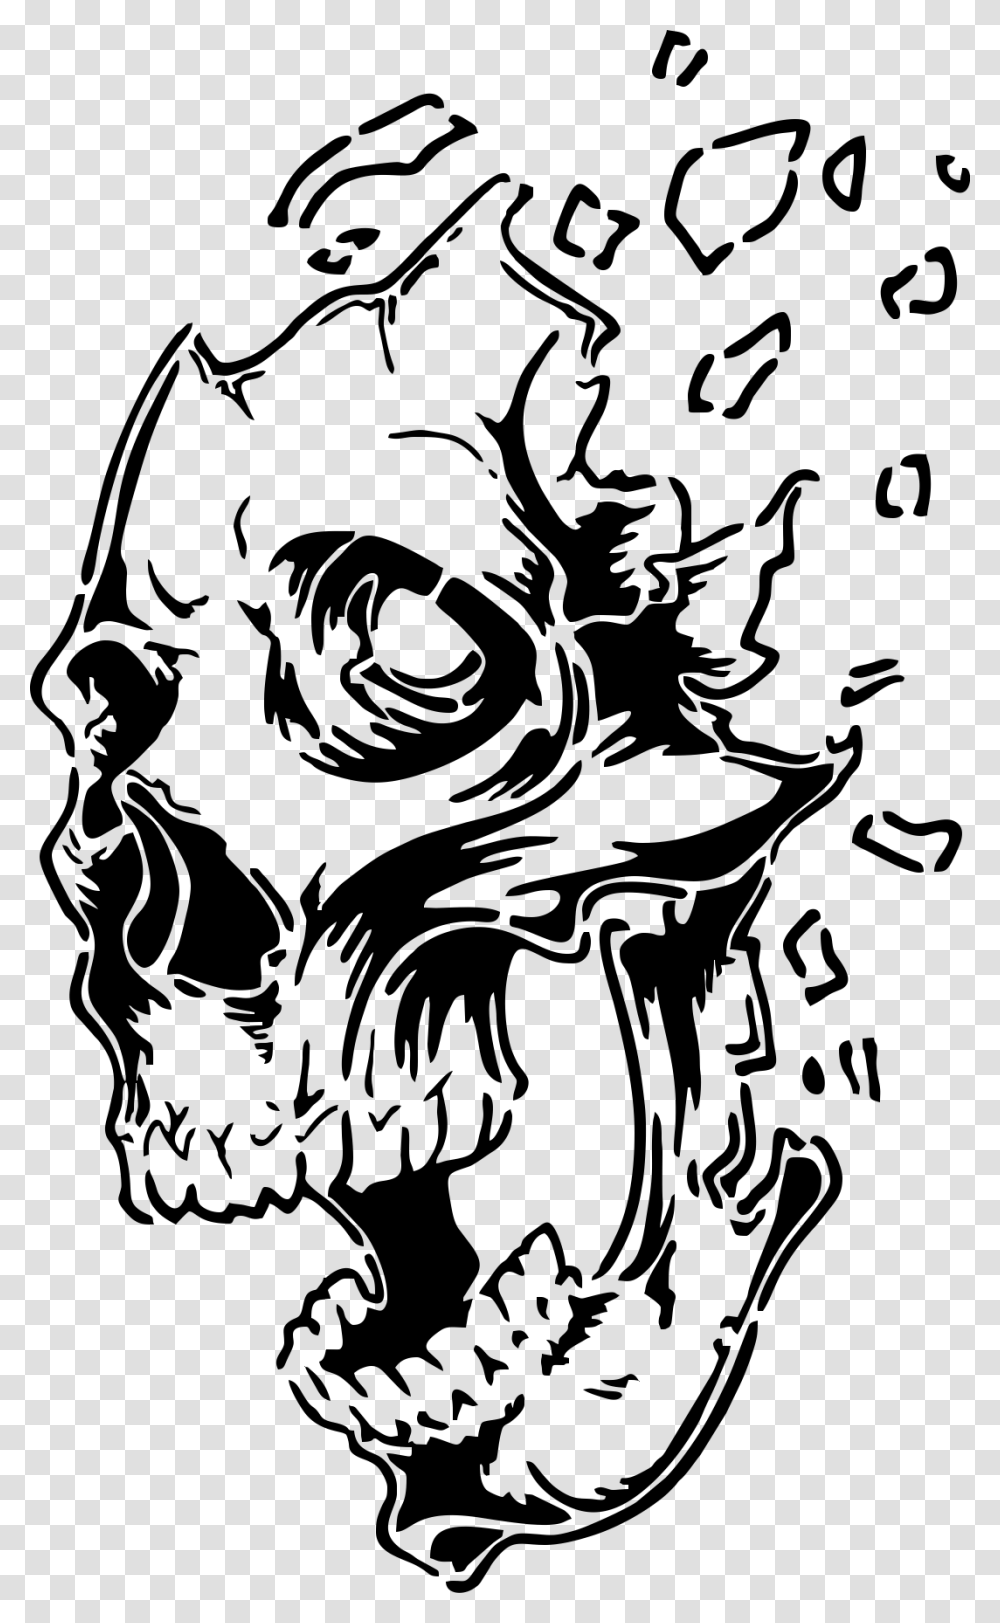 Pin By Bruce Jackson On Decals Skull Drawings Board Stencil Art Skull Stencil Transparent Png